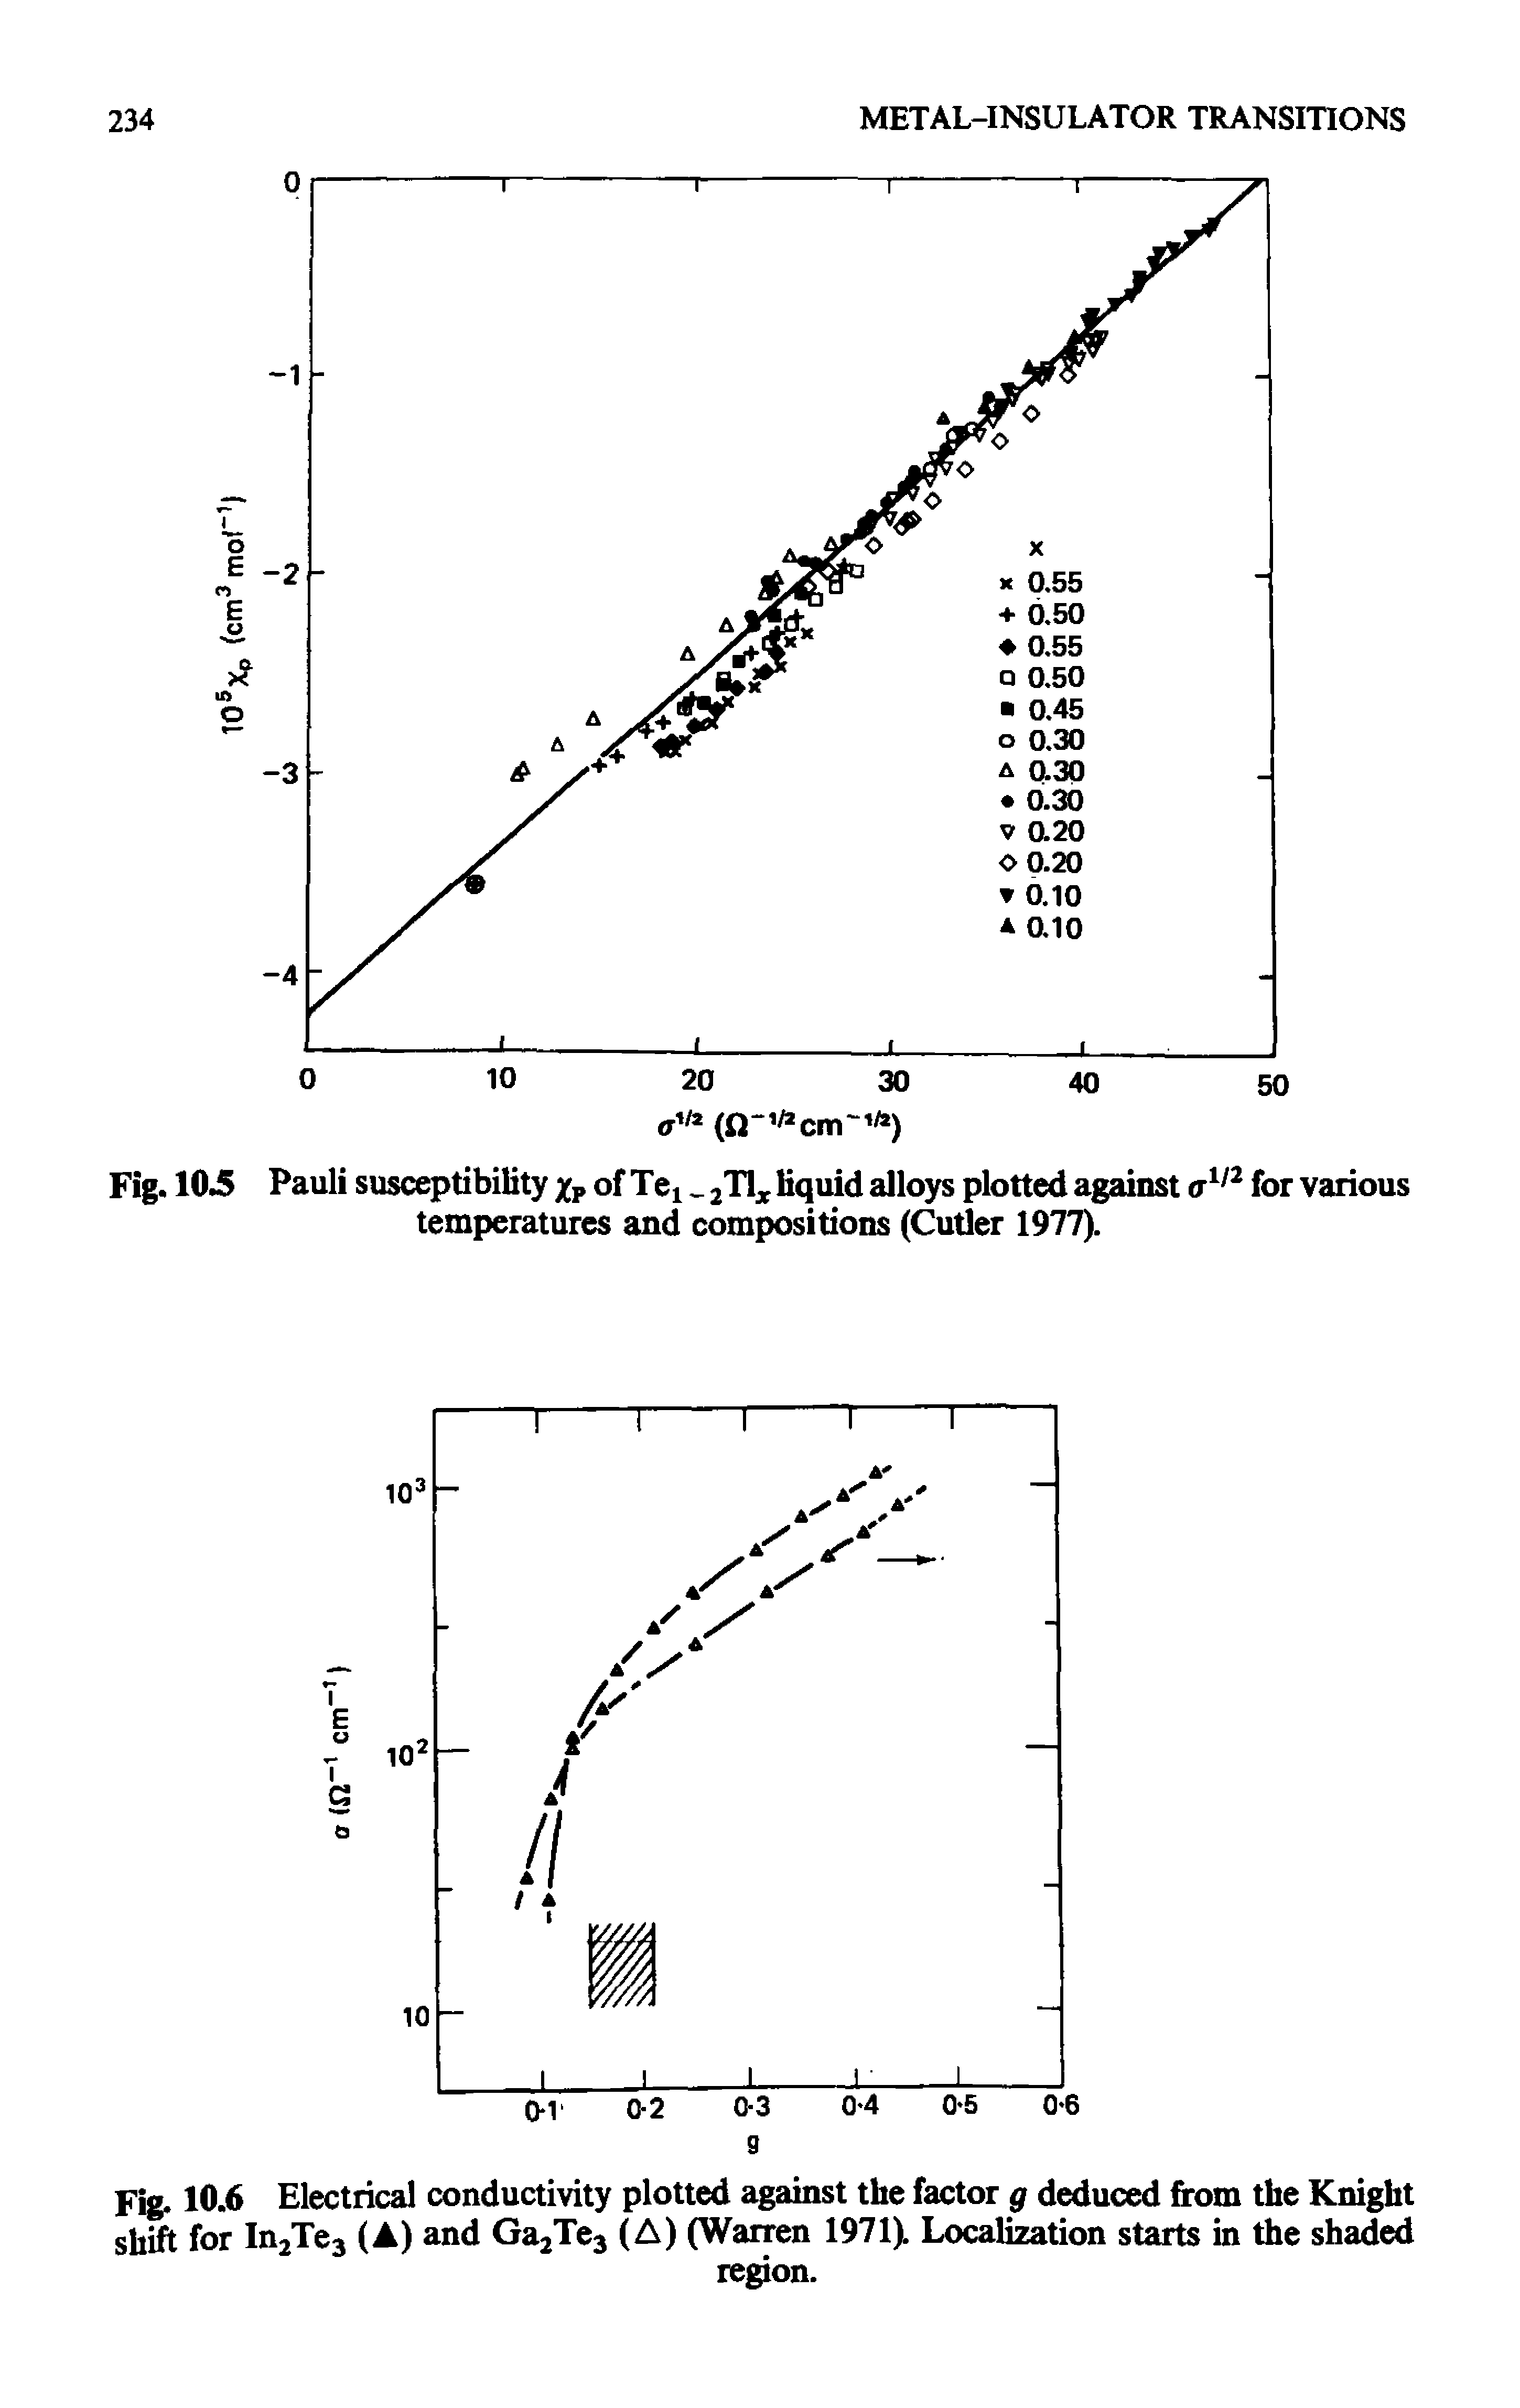 Fig. 10.5 Pauli susceptibility xP of Tei 2T1X liquid alloys plotted against <x1/2 for various temperatures and compositions (Cutler 1977).